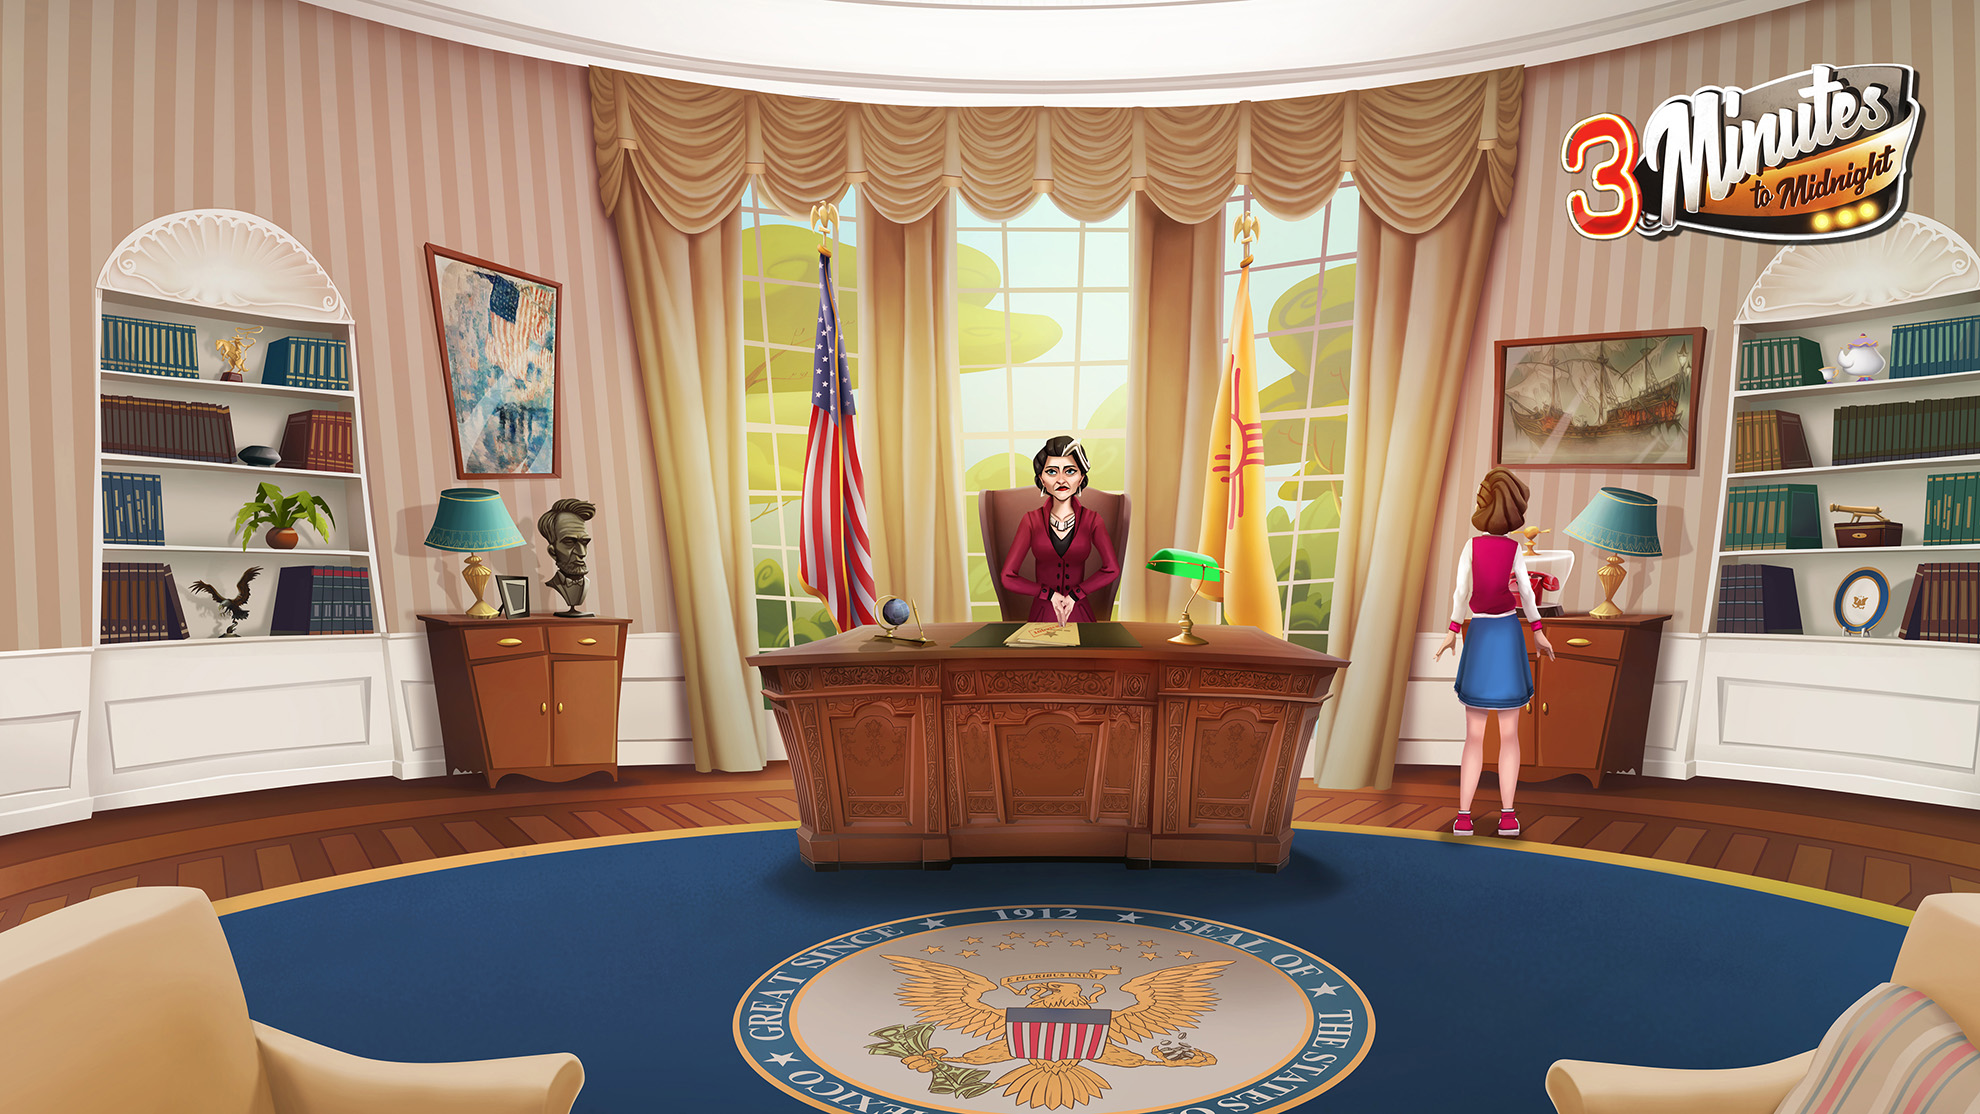 3 Minutes to Midnight - A Comedy Graphic Adventure screenshot